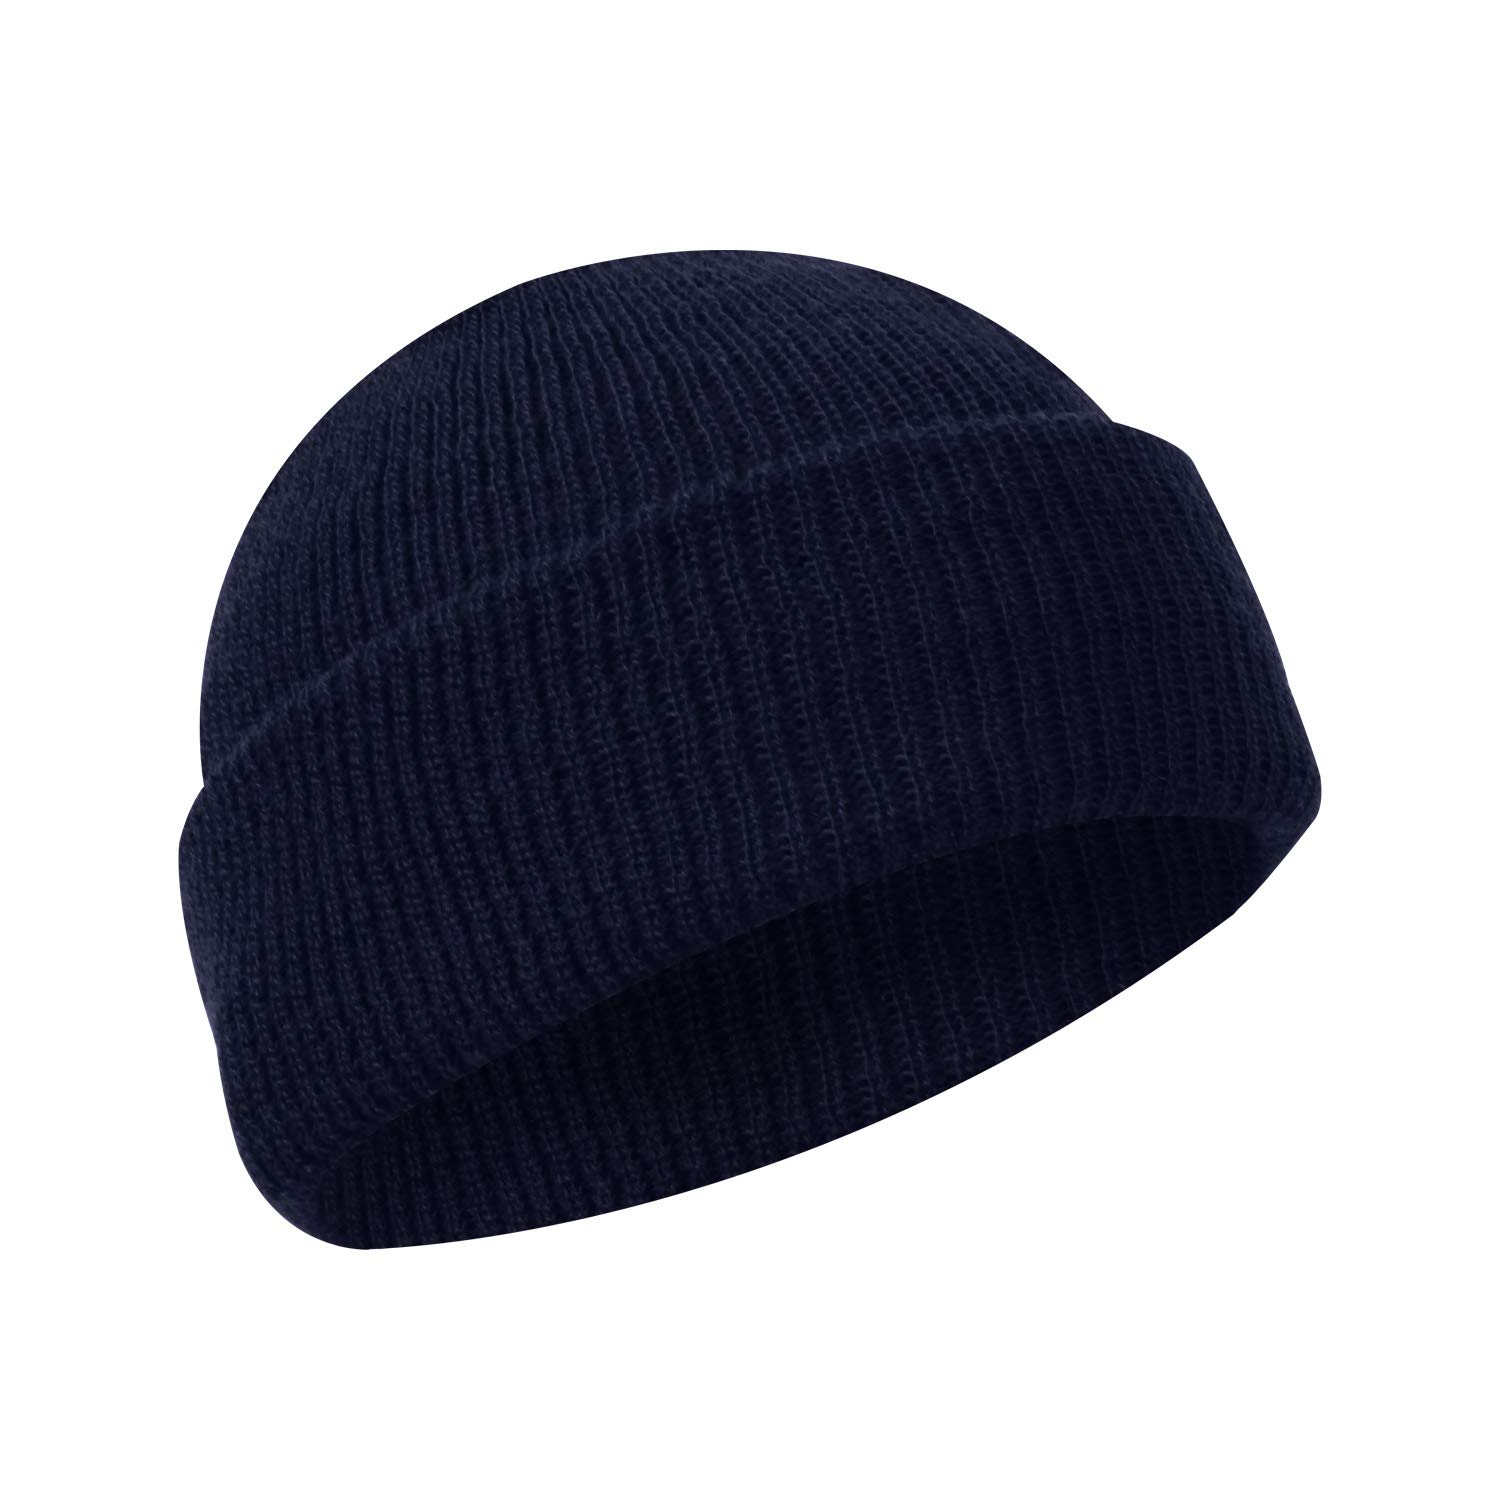 Rothco Genuine Wool Watch Cap Thick Beanie Hat Winter Cap